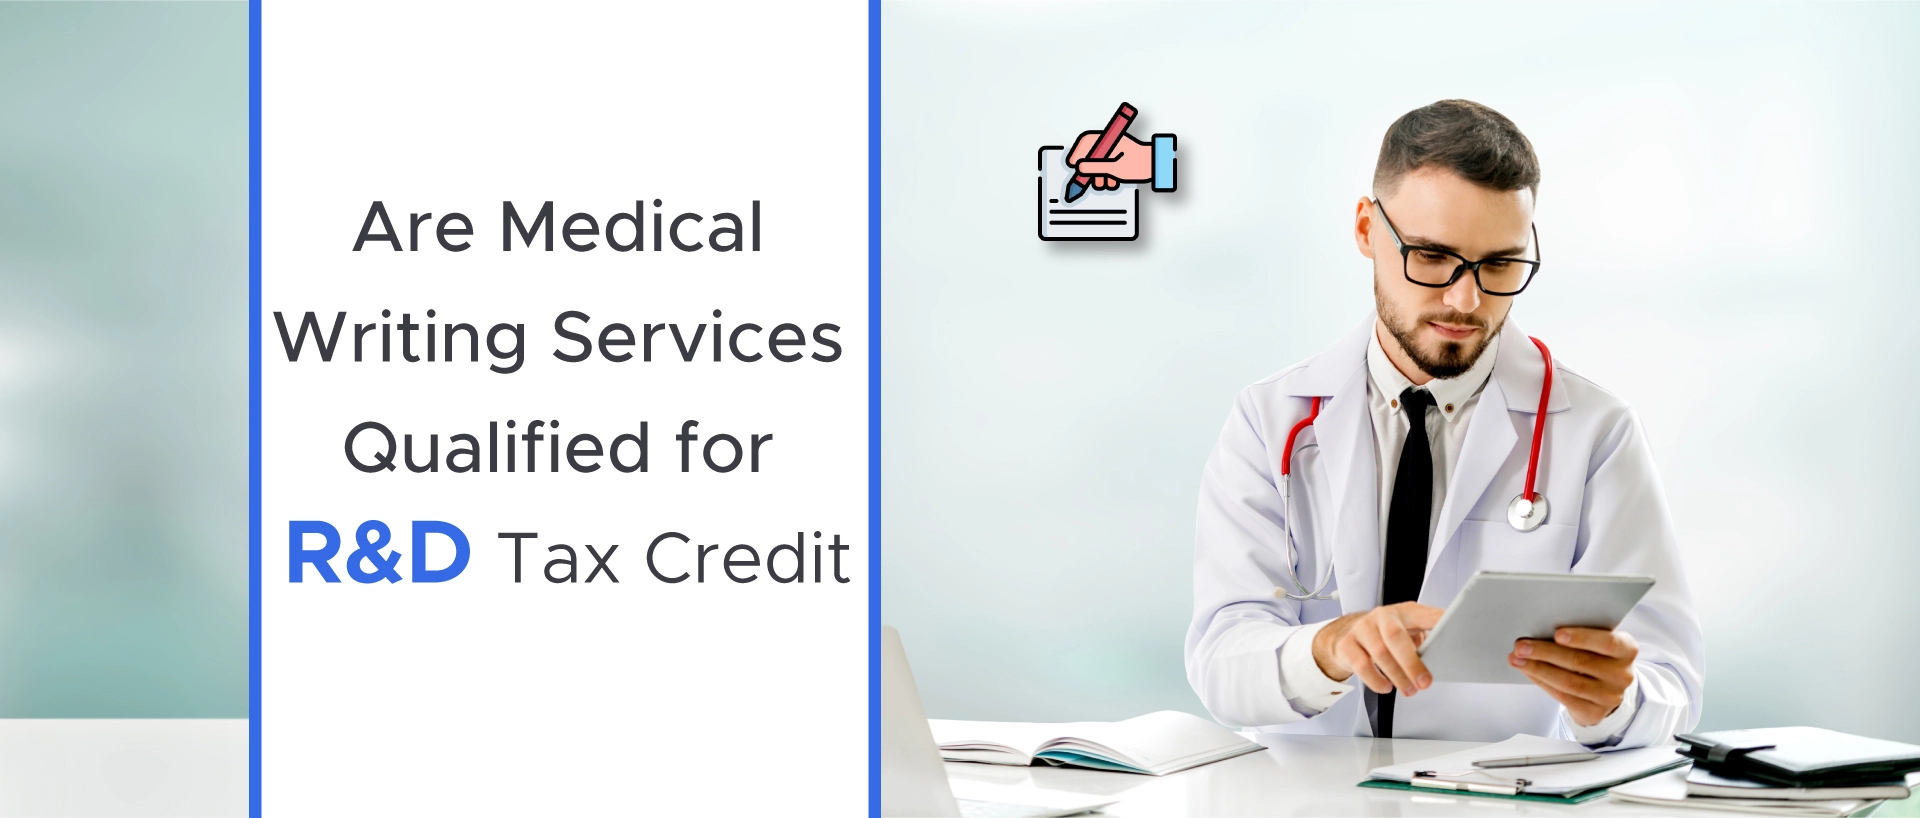 are medical writing services qualified for r&d tax credit